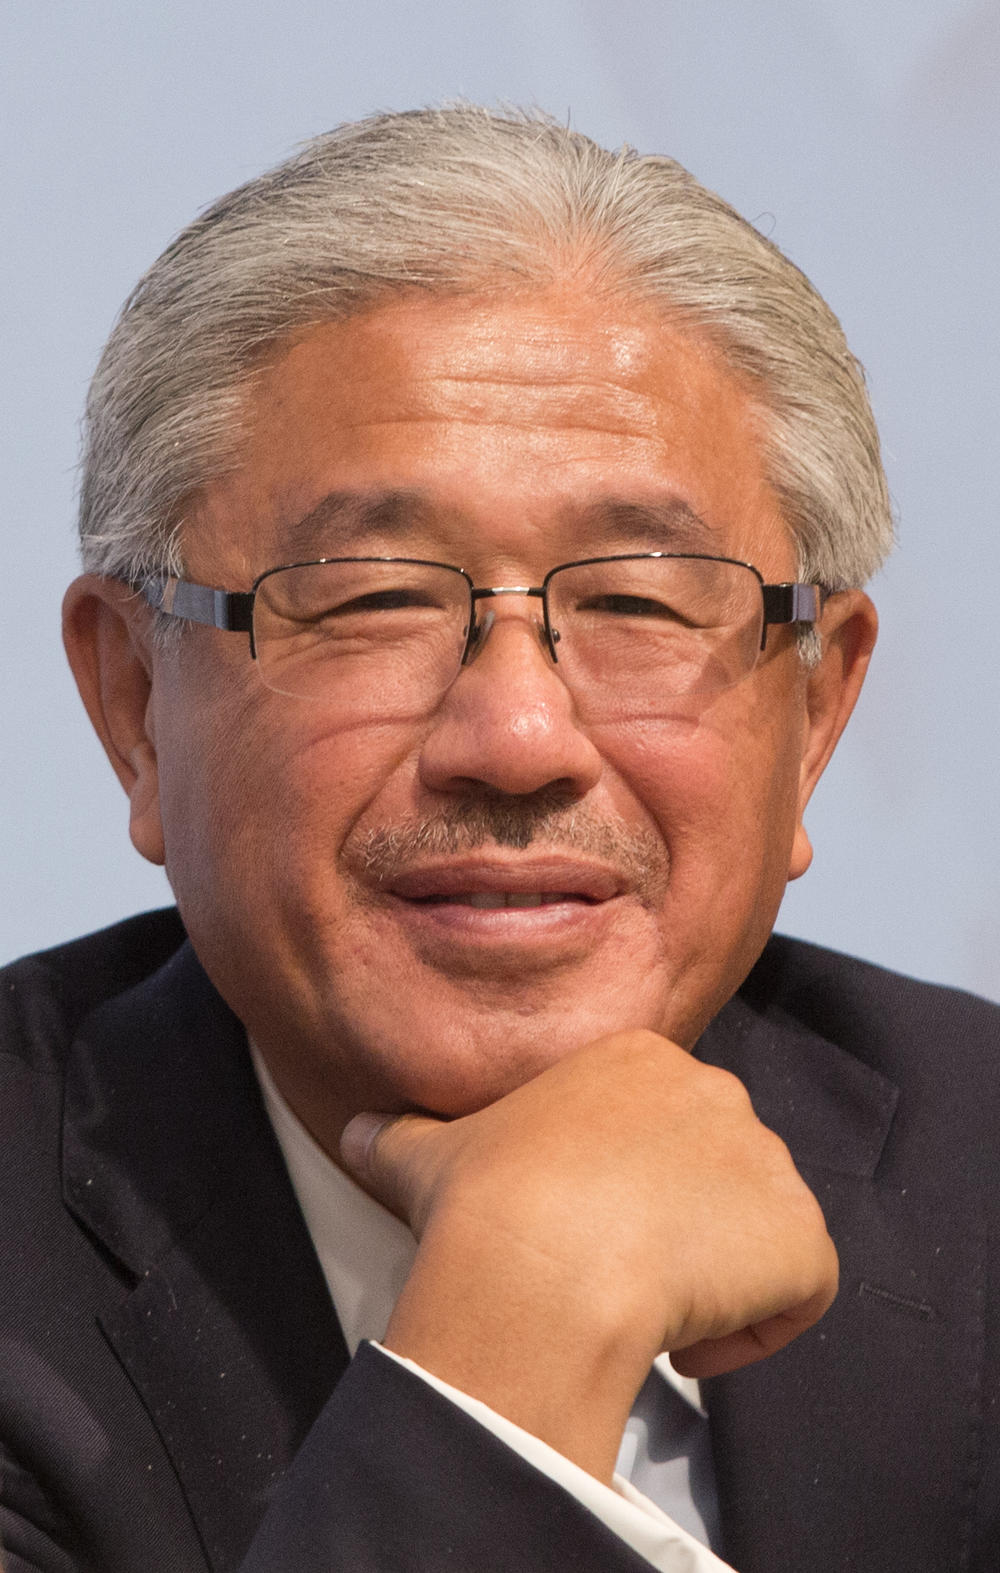 Dr. Victor Dzau, president of the National Academy of Medicine, attends the 2015 World Health Summit in Berlin.